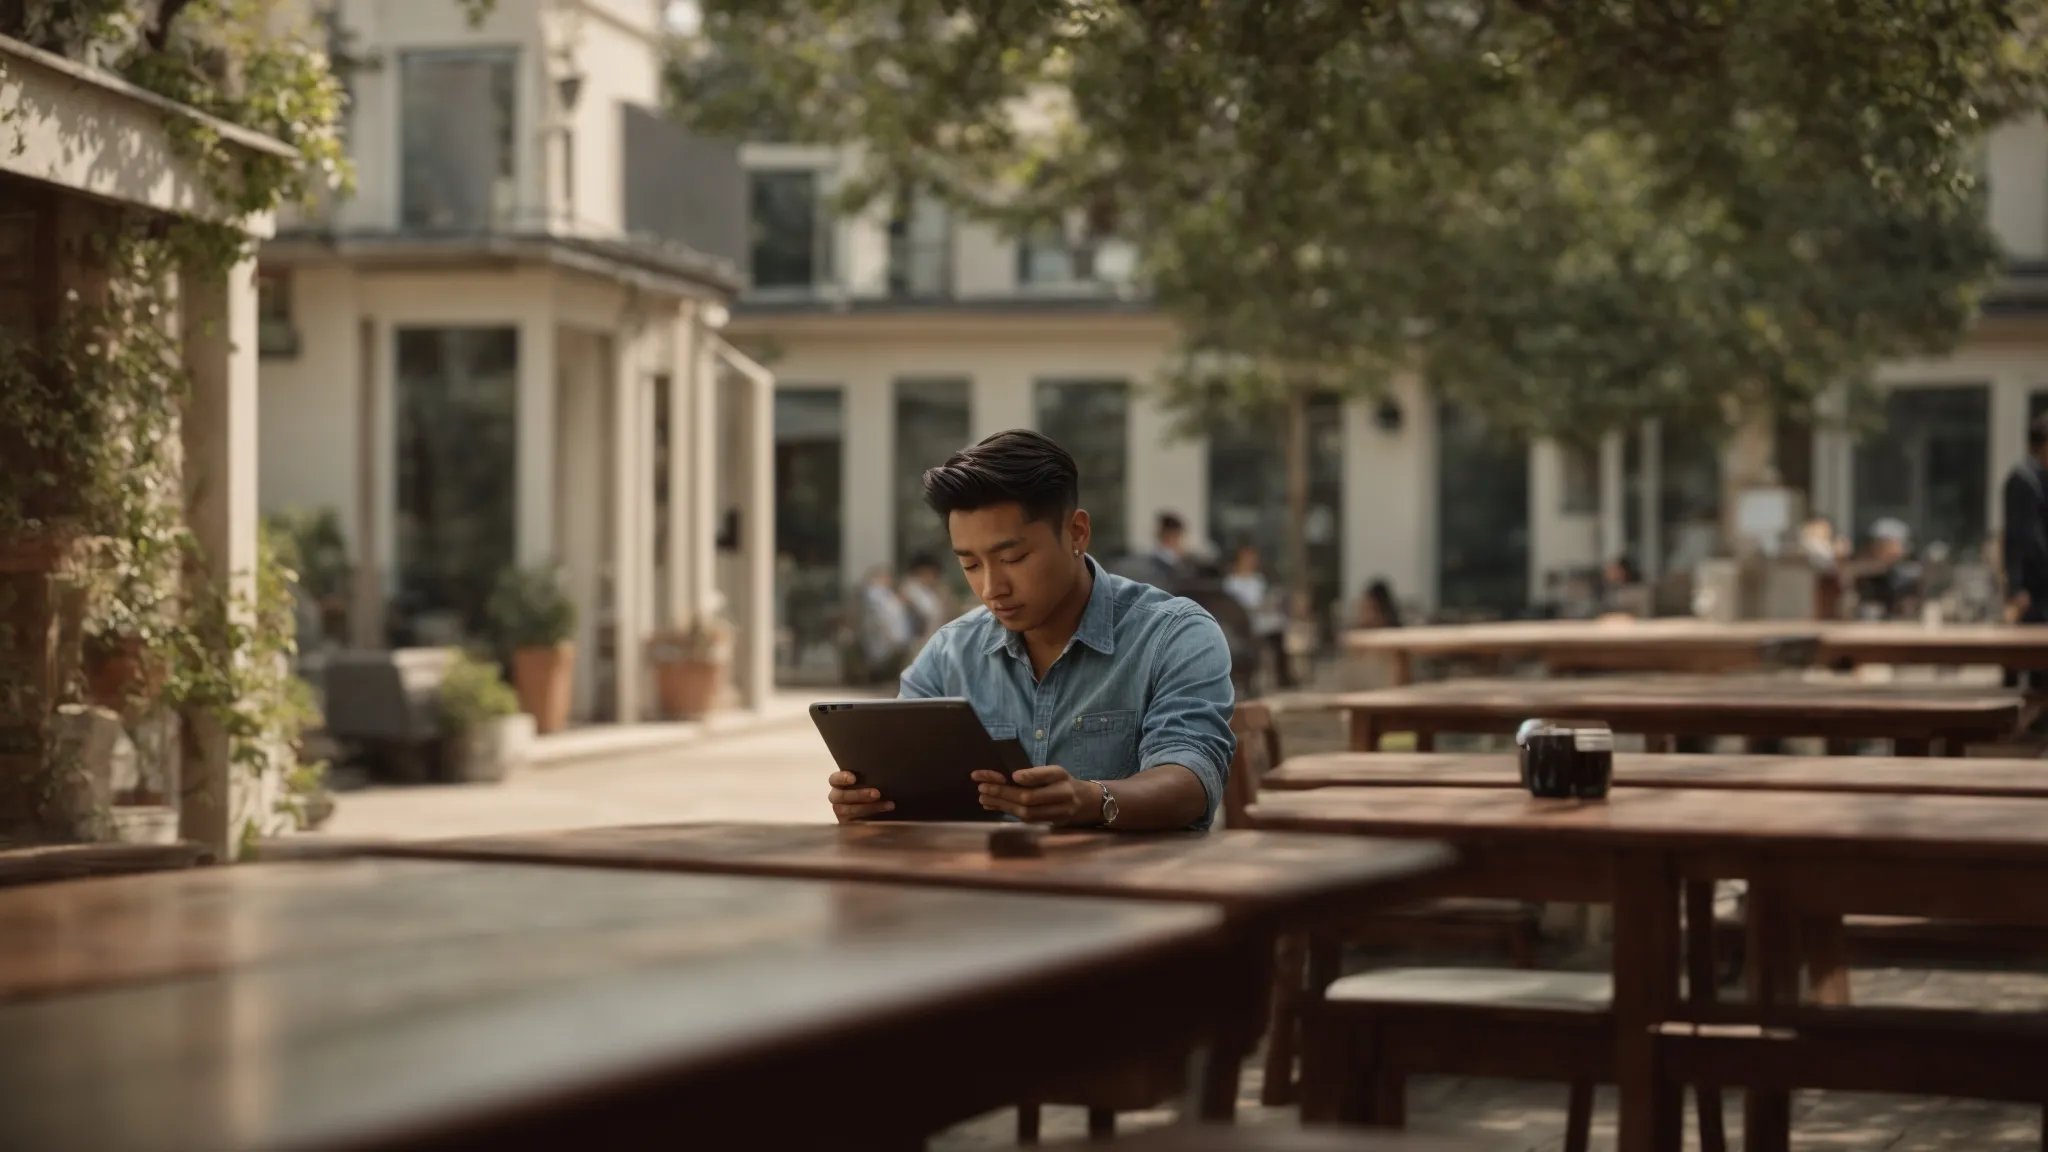 a person sitting at a table outdoors, focused intently on a tablet.